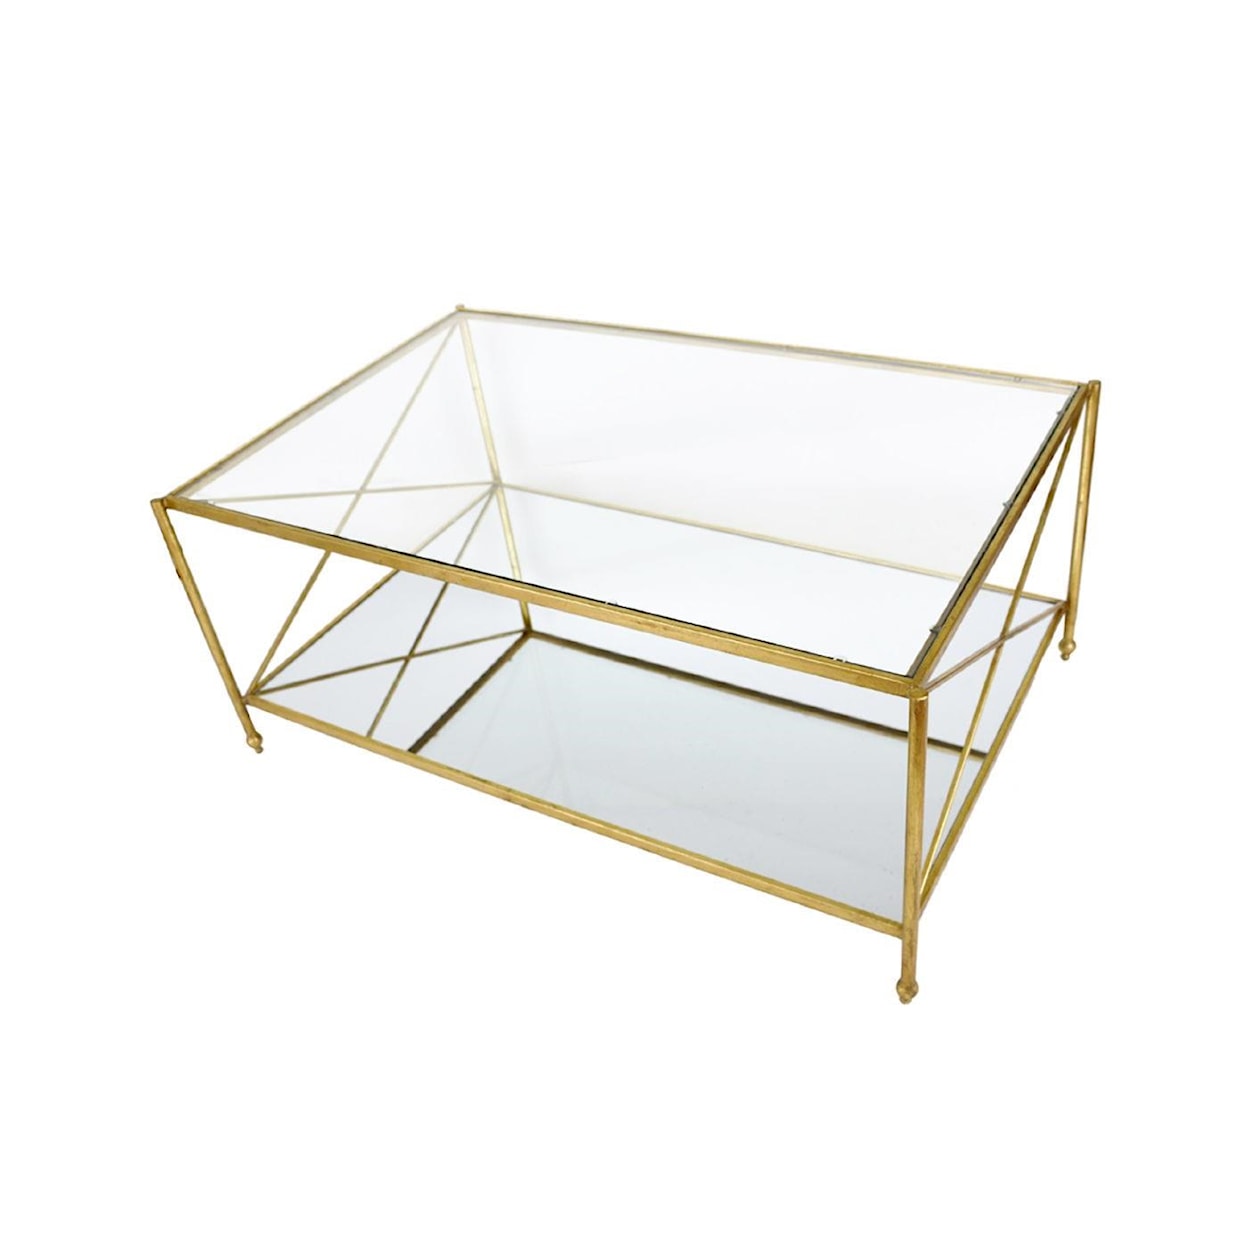 Zeugma Import Gold Gold Rect Coffee Table